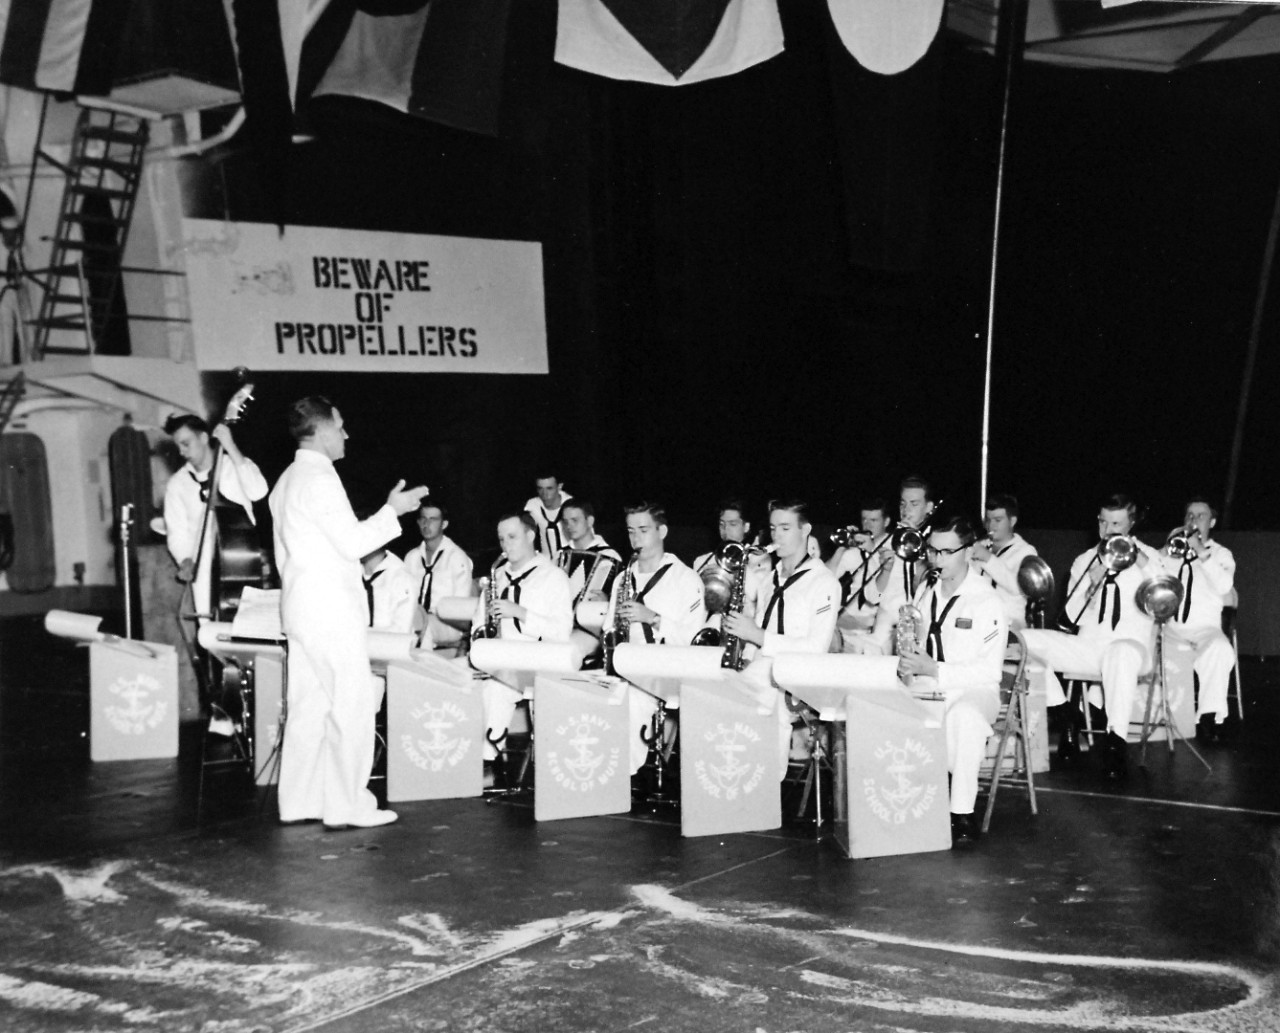 USS Leyte (CV-32), 1949.   Official reception of Vice Admiral Donald B. Duncan, USN, COMSECTASKFLT, on board USS Leyte (CV-32) at Trinidan, B.W.I.   Shown:  Band at reception.     Photograph released March 10, 1949.   Official U.S. Navy photograph, now in the collections of the National Archives.  (2016/11/15).